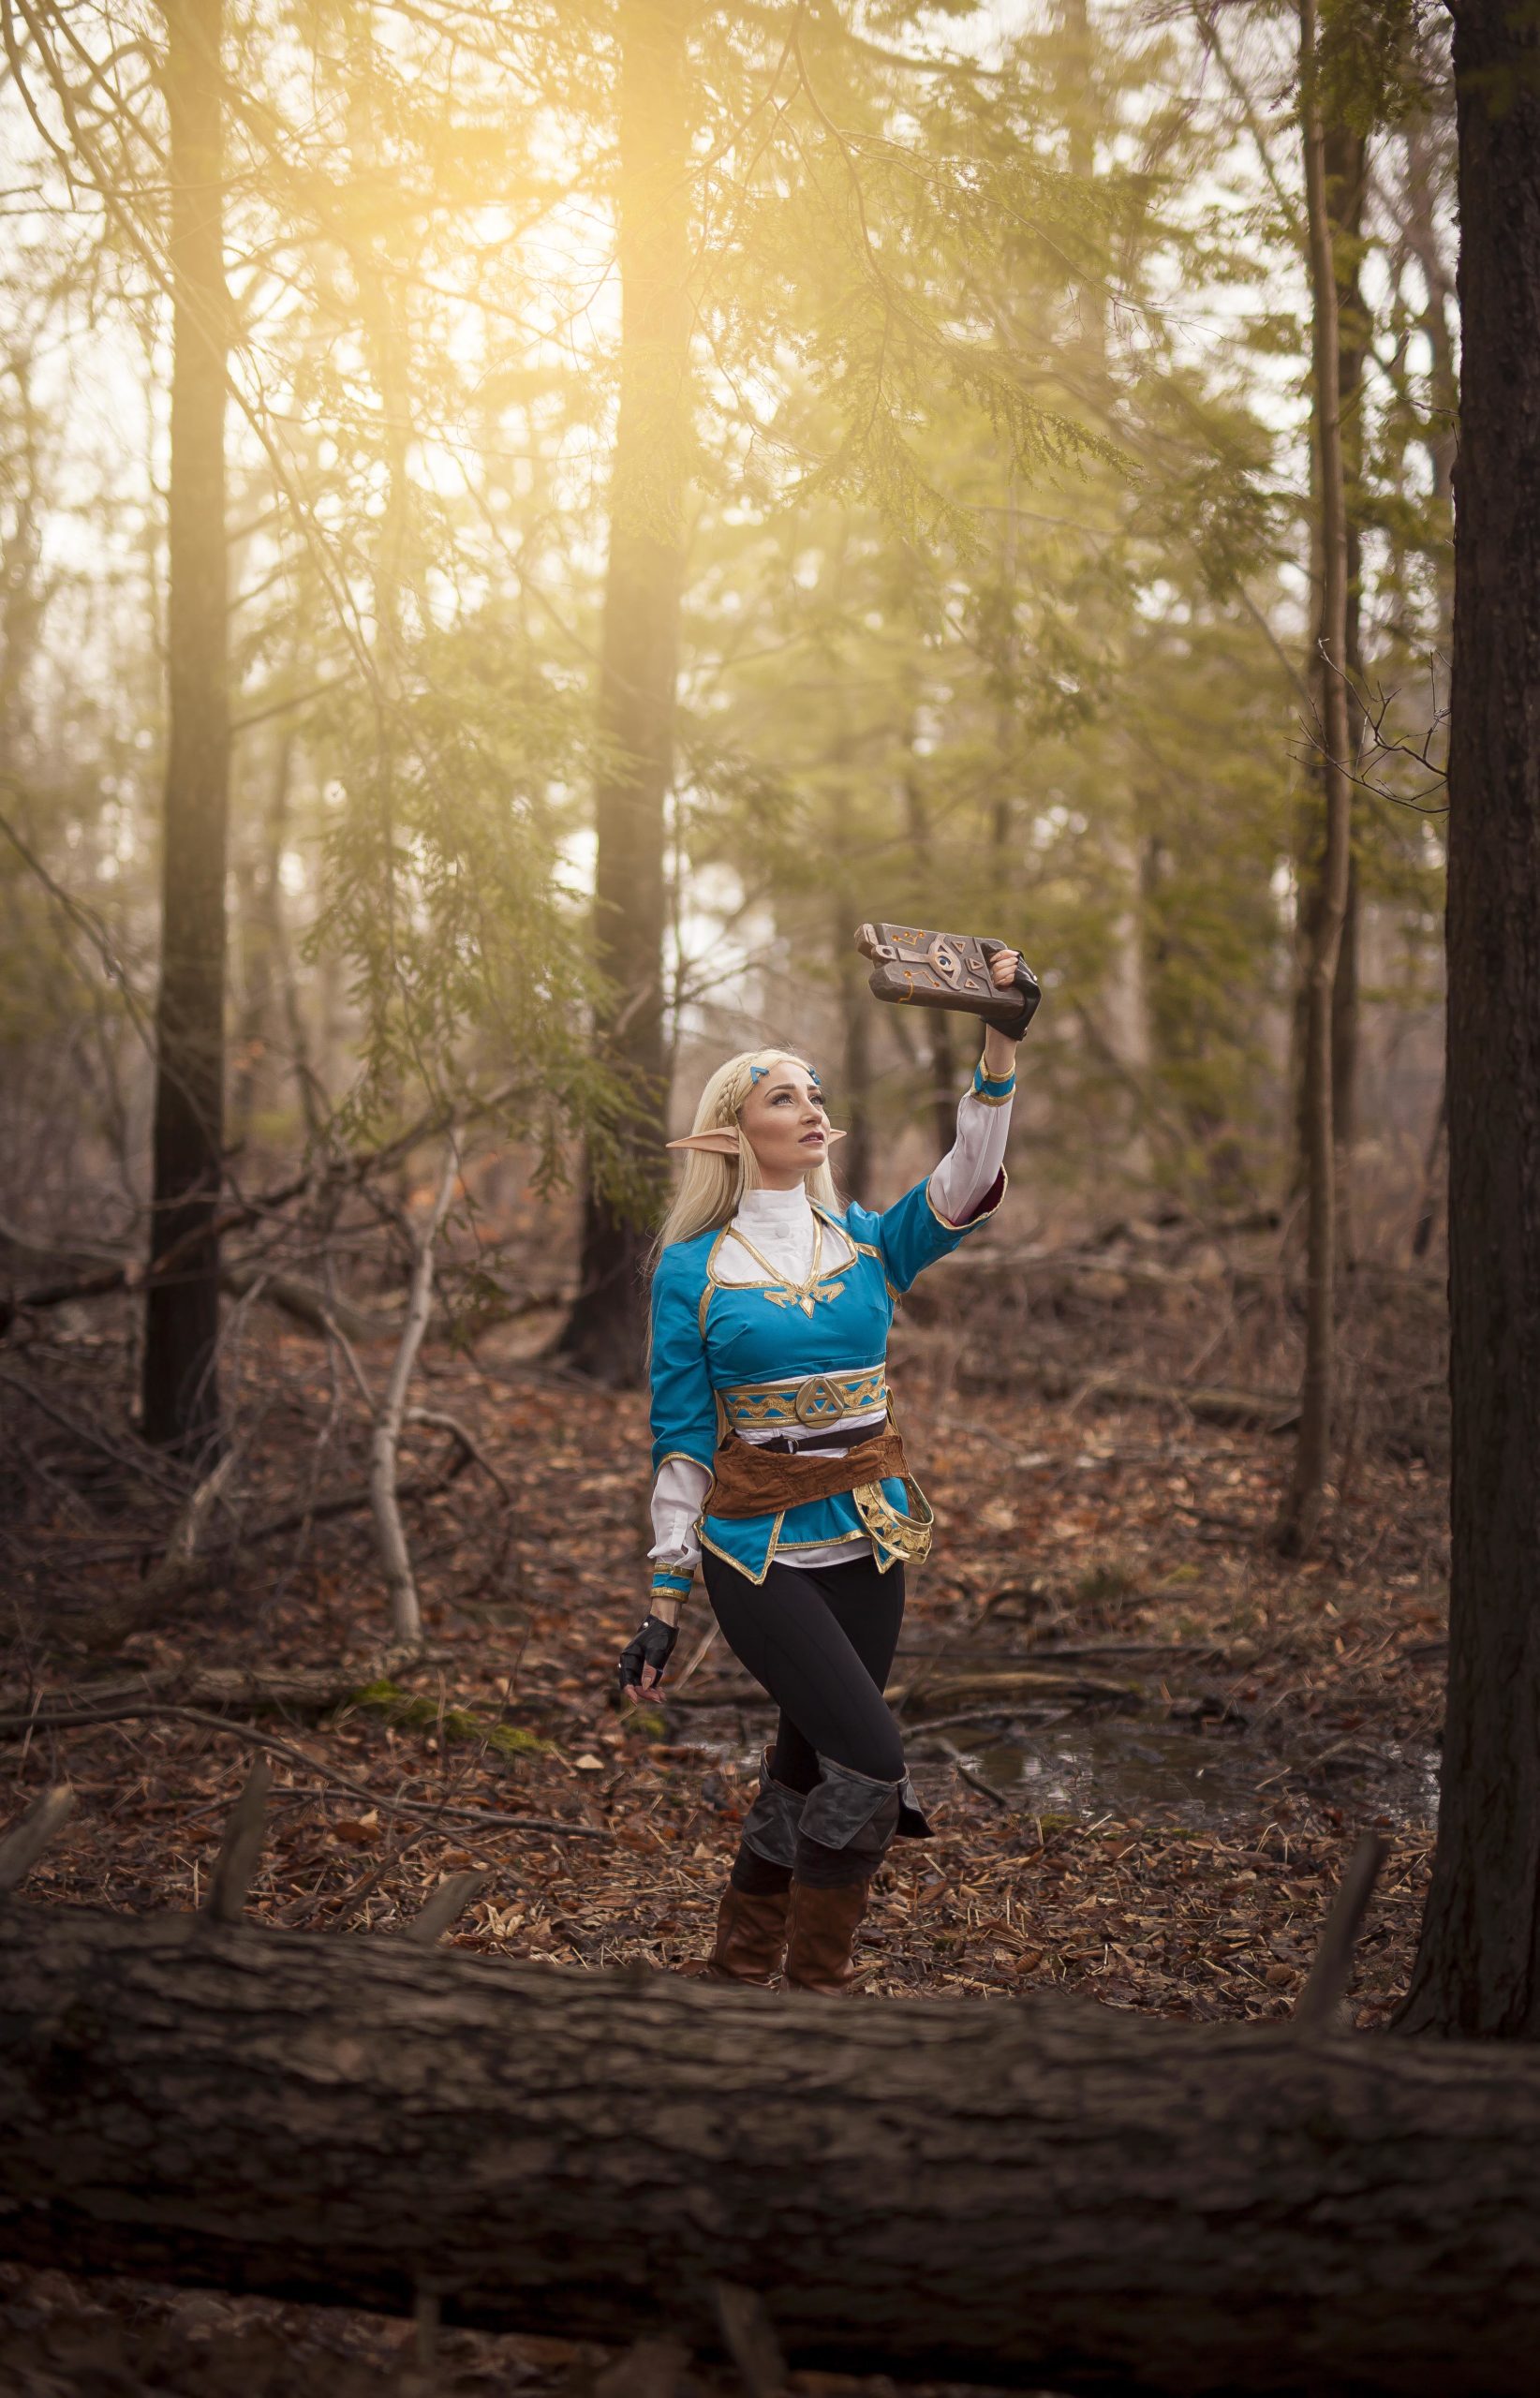 Here Comes The Zelda: Breath Of The Wild Cosplay